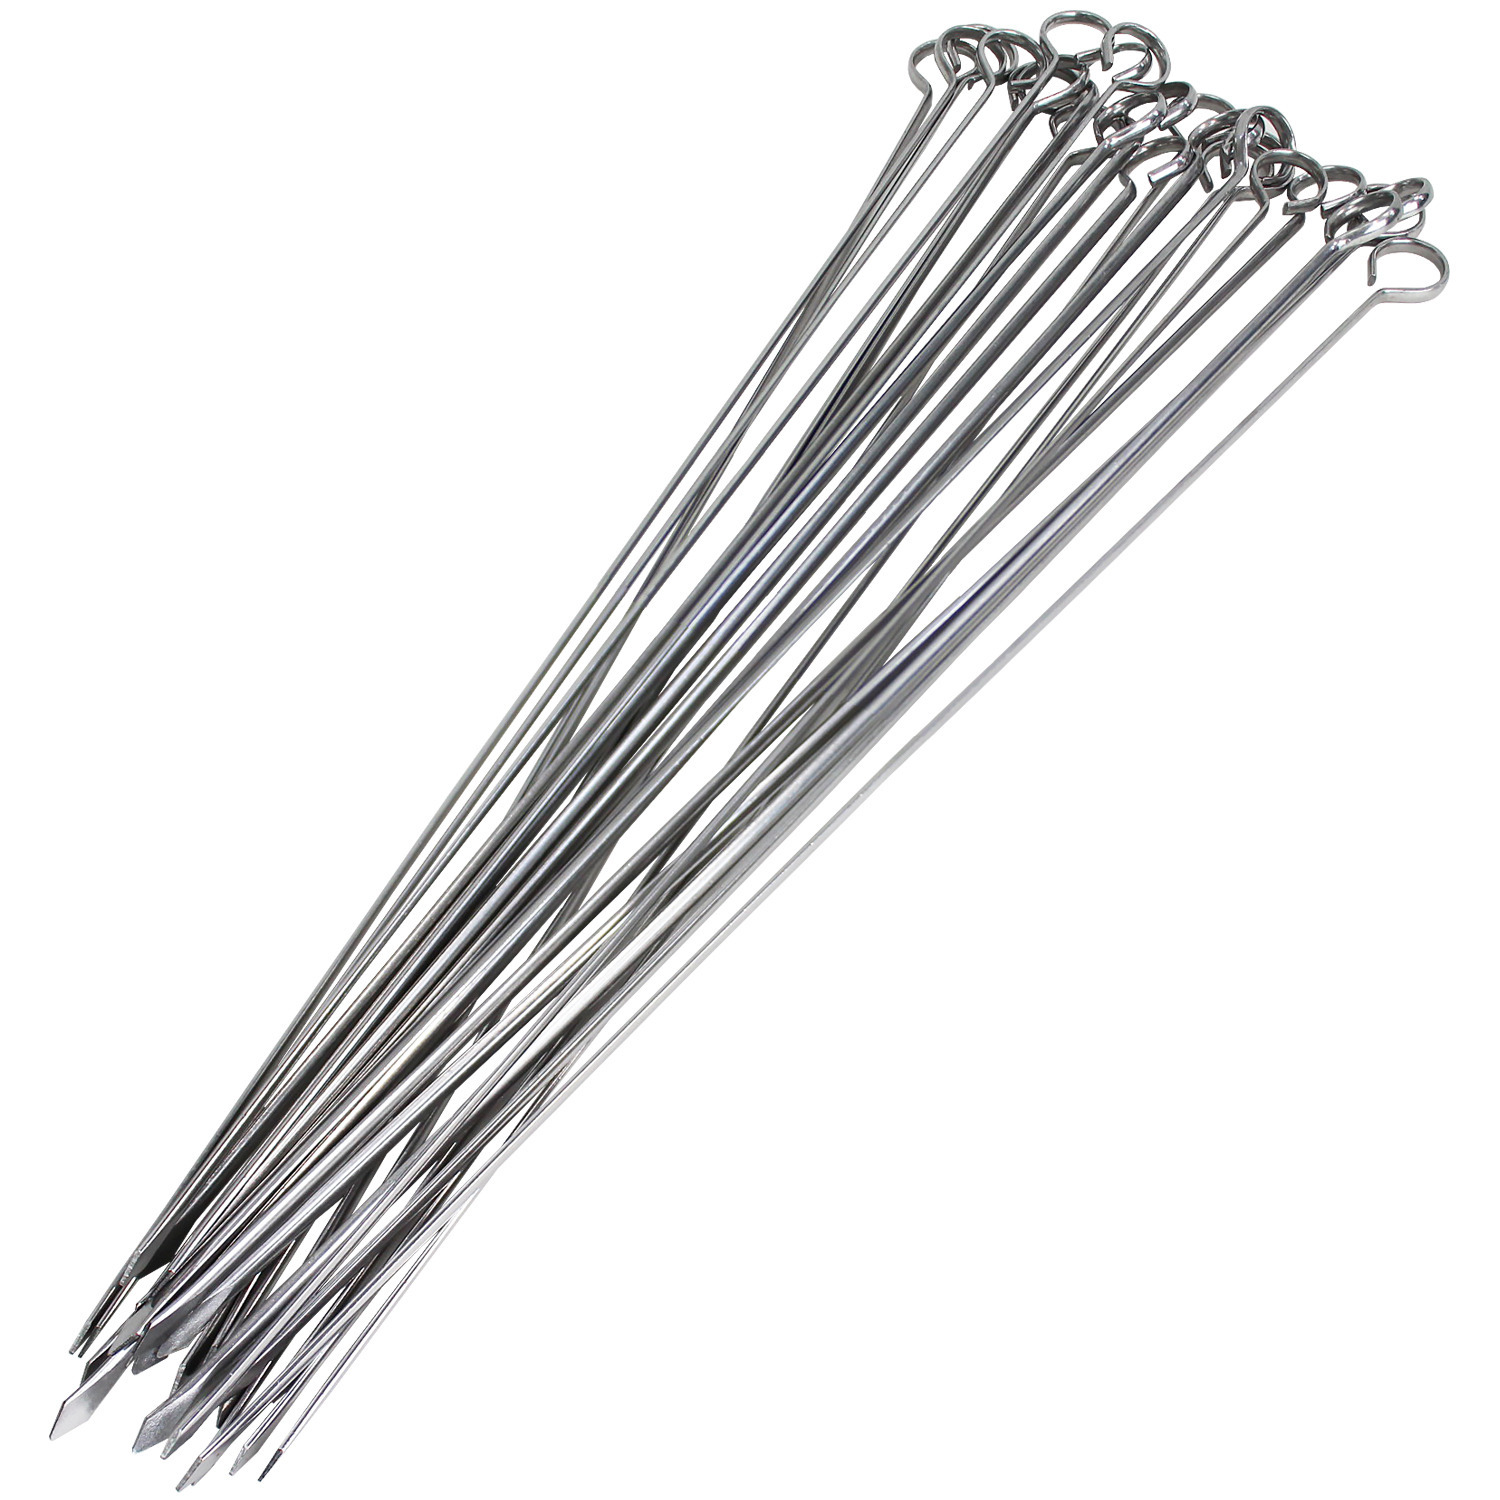 17 inch BBQ Skewers Set of 24, Used for Barbecuing Meat, Poultry, Seafood, Vegetables, Cheese, Fruit, Stainless Steel, Barbeque Accessories